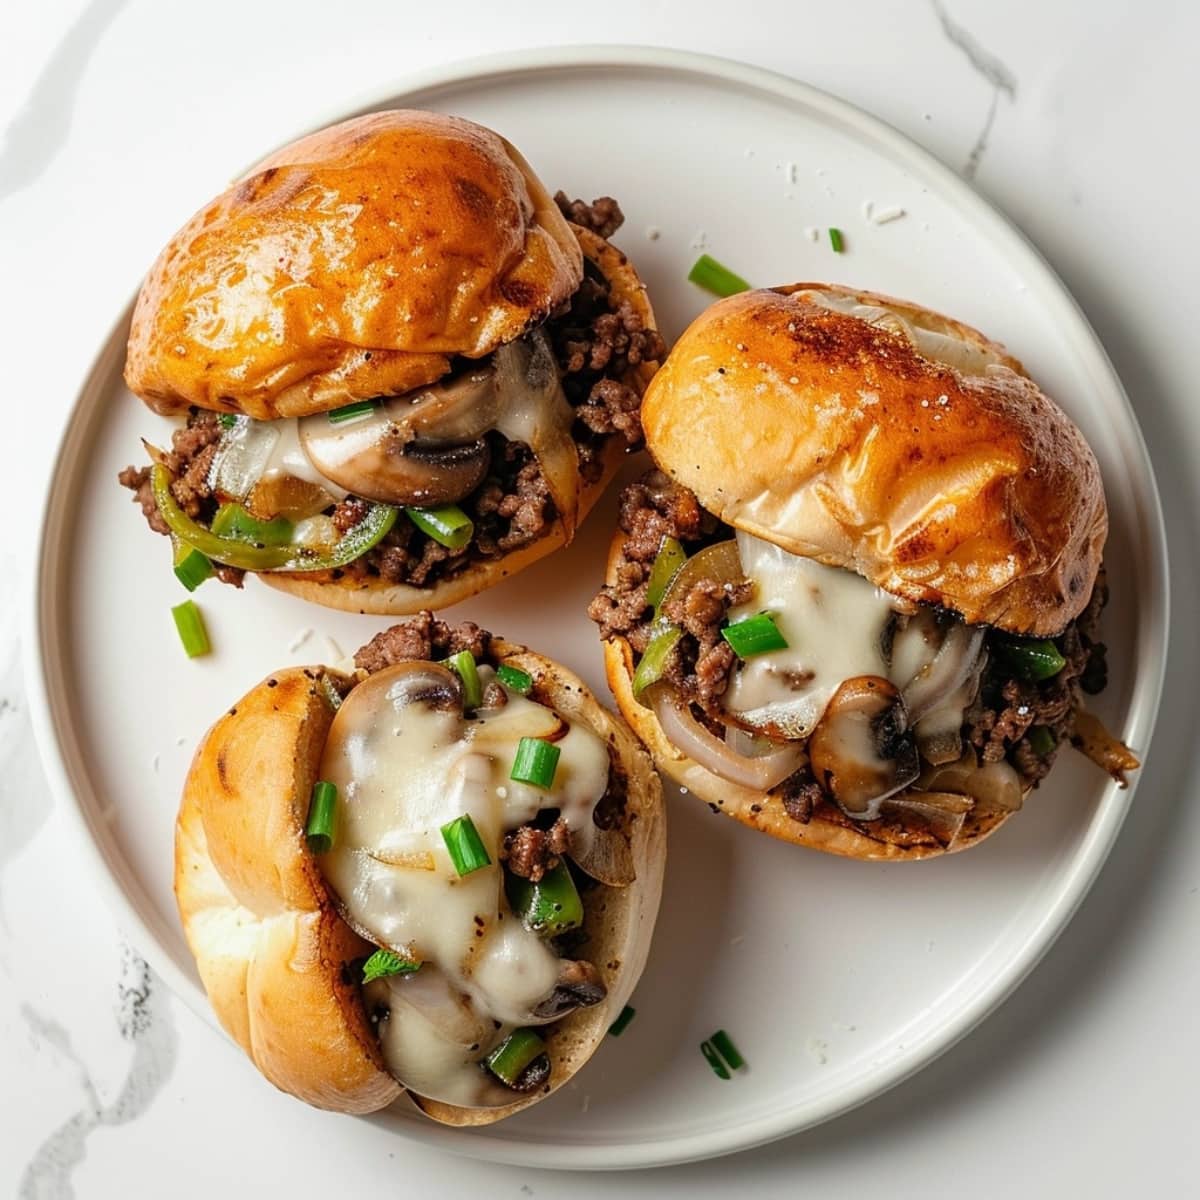 Top view of Philly Cheesesteak Sloppy Joes with melted cheese, ground beef, mushroom, onion, green bell pepper served on a white plate.